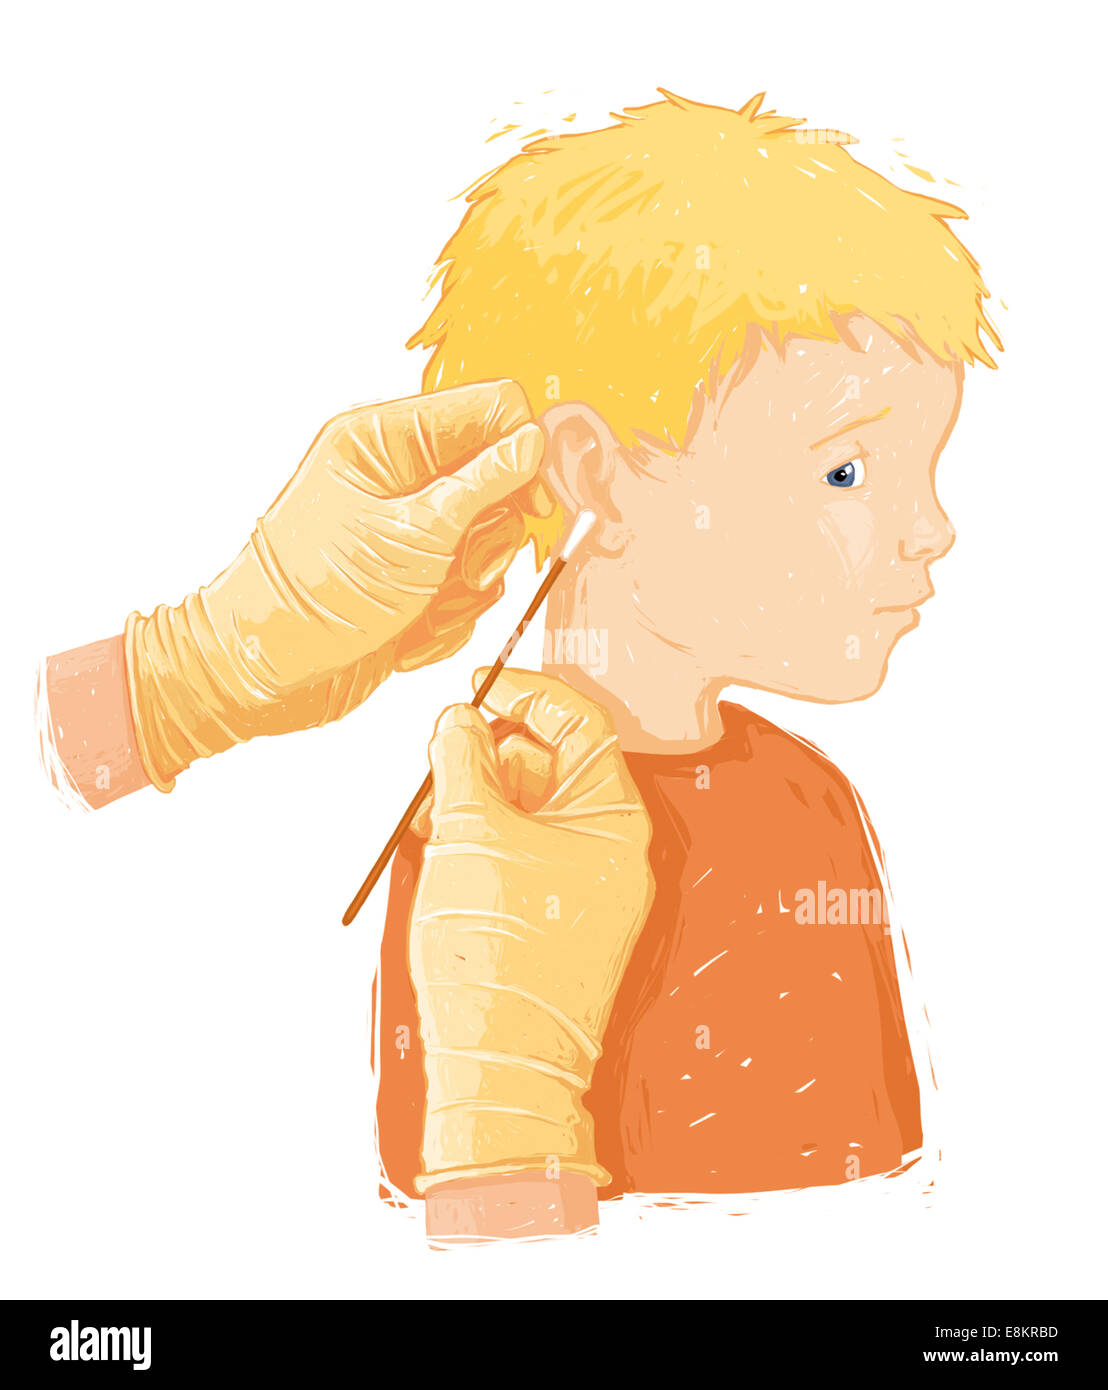 Taking a bacteria sample from a childs infected ear (otitis), in preparation for an antibiogram. Stock Photo